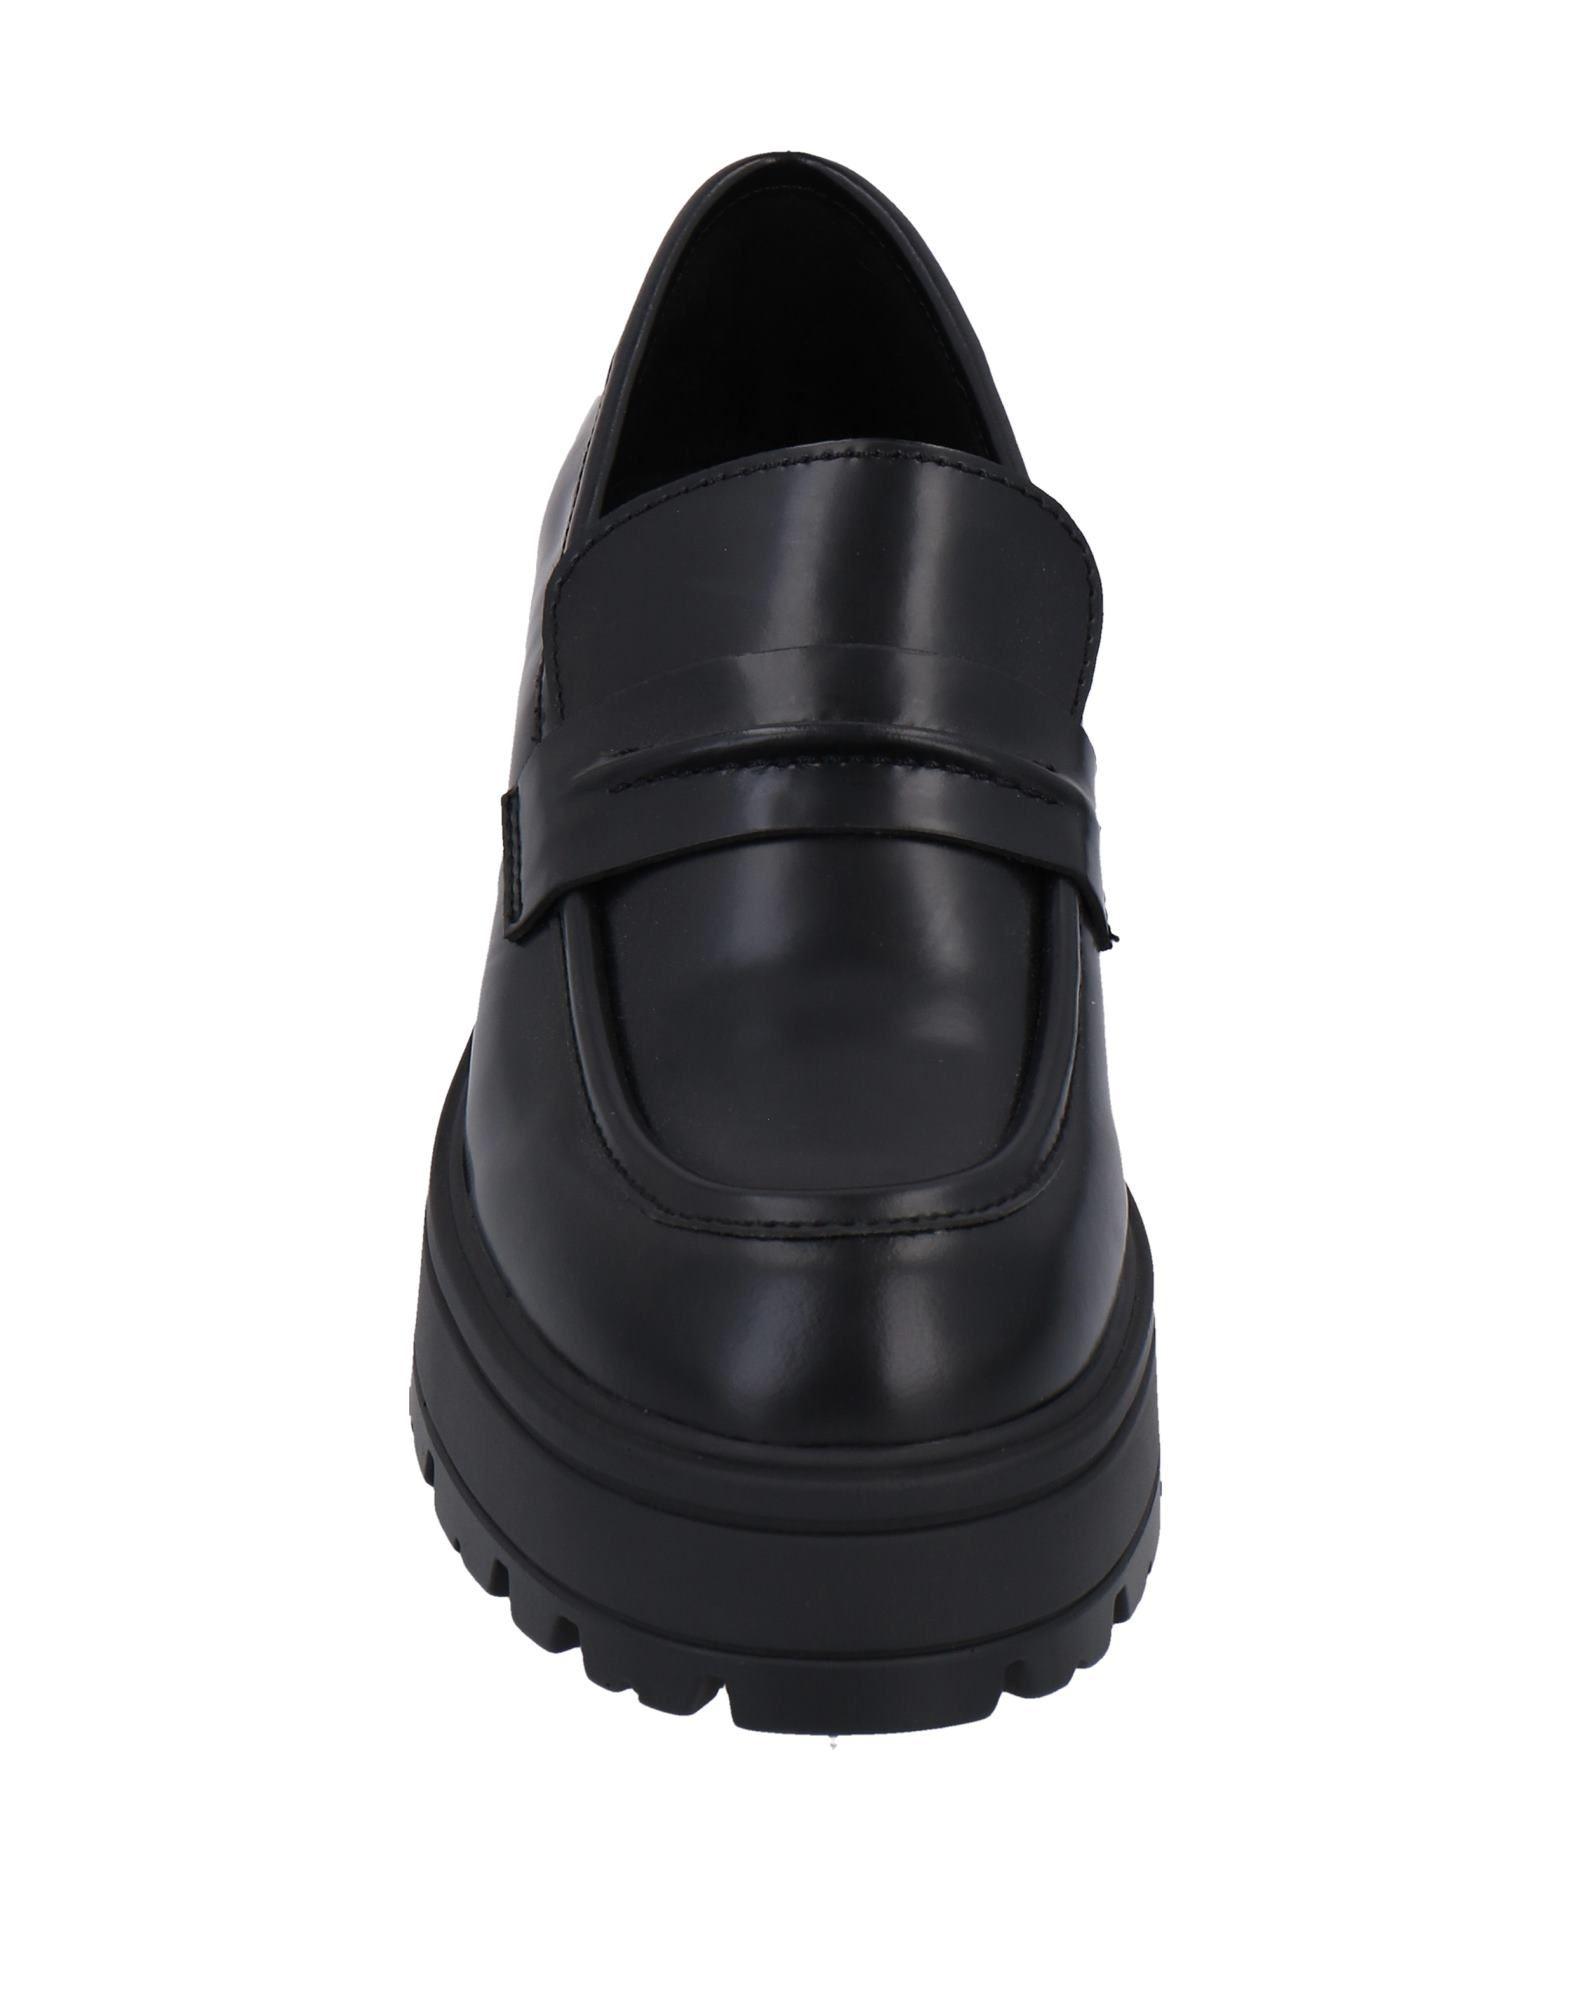 Windsor Smith Leather Loafer in Black - Lyst